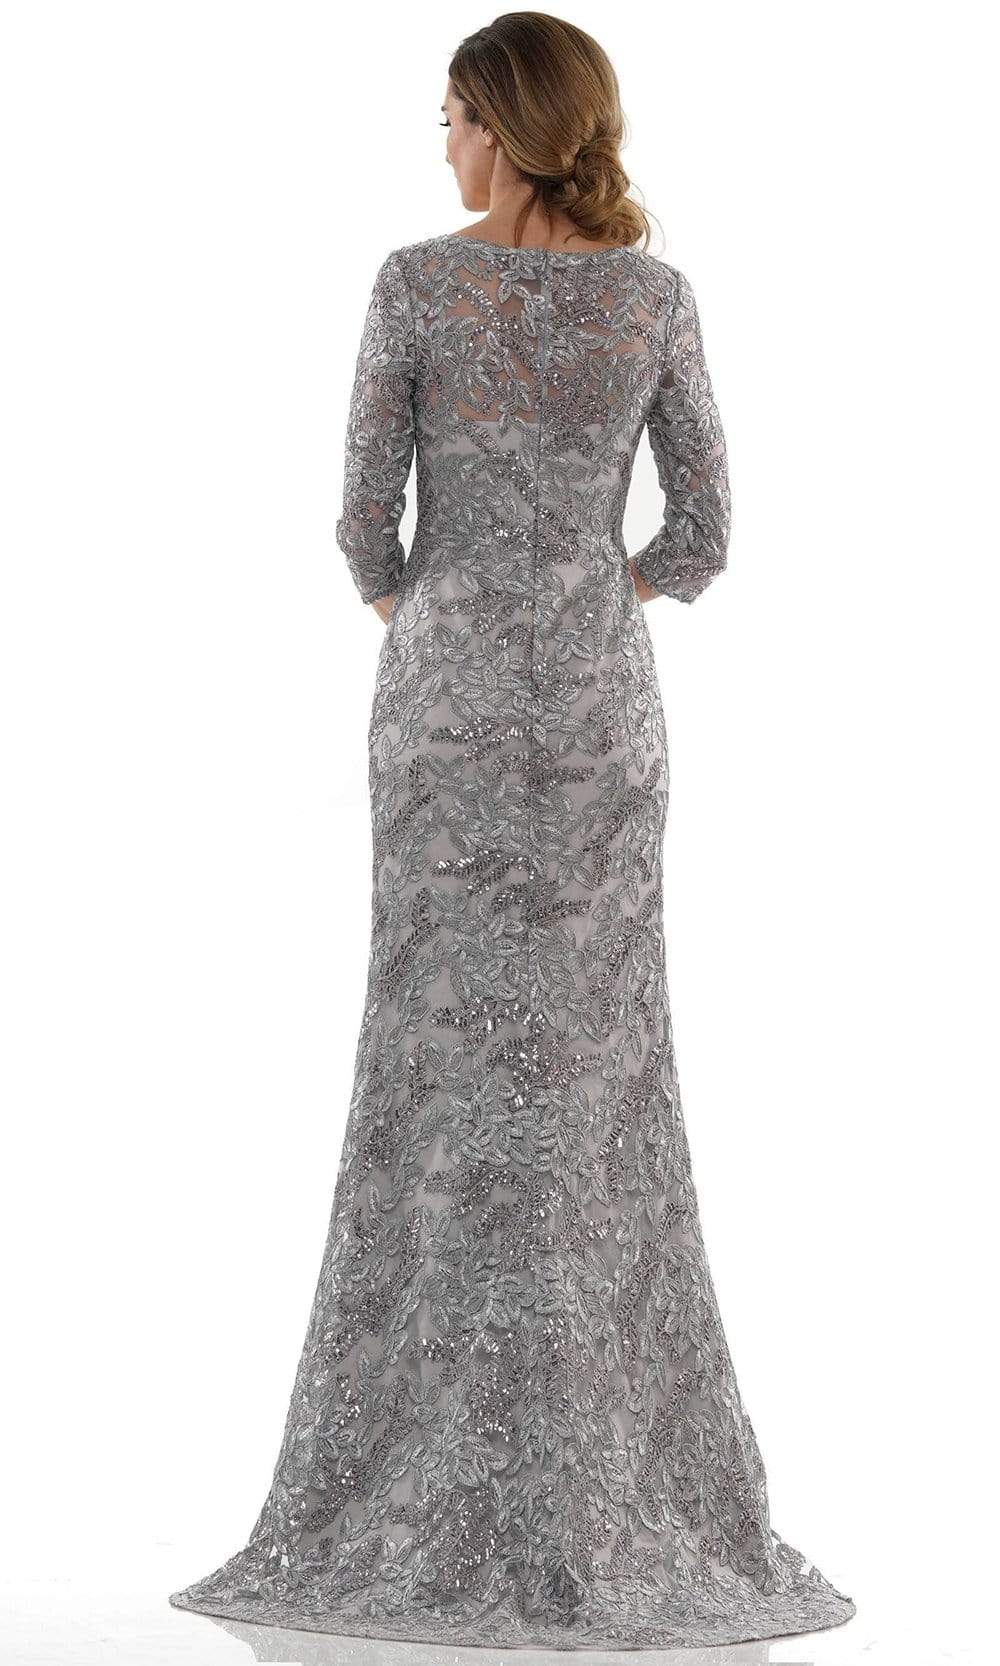 Marsoni by Colors - MV1119 Sequin and Embroidered Sheath Dress Mother of the Bride Dresses